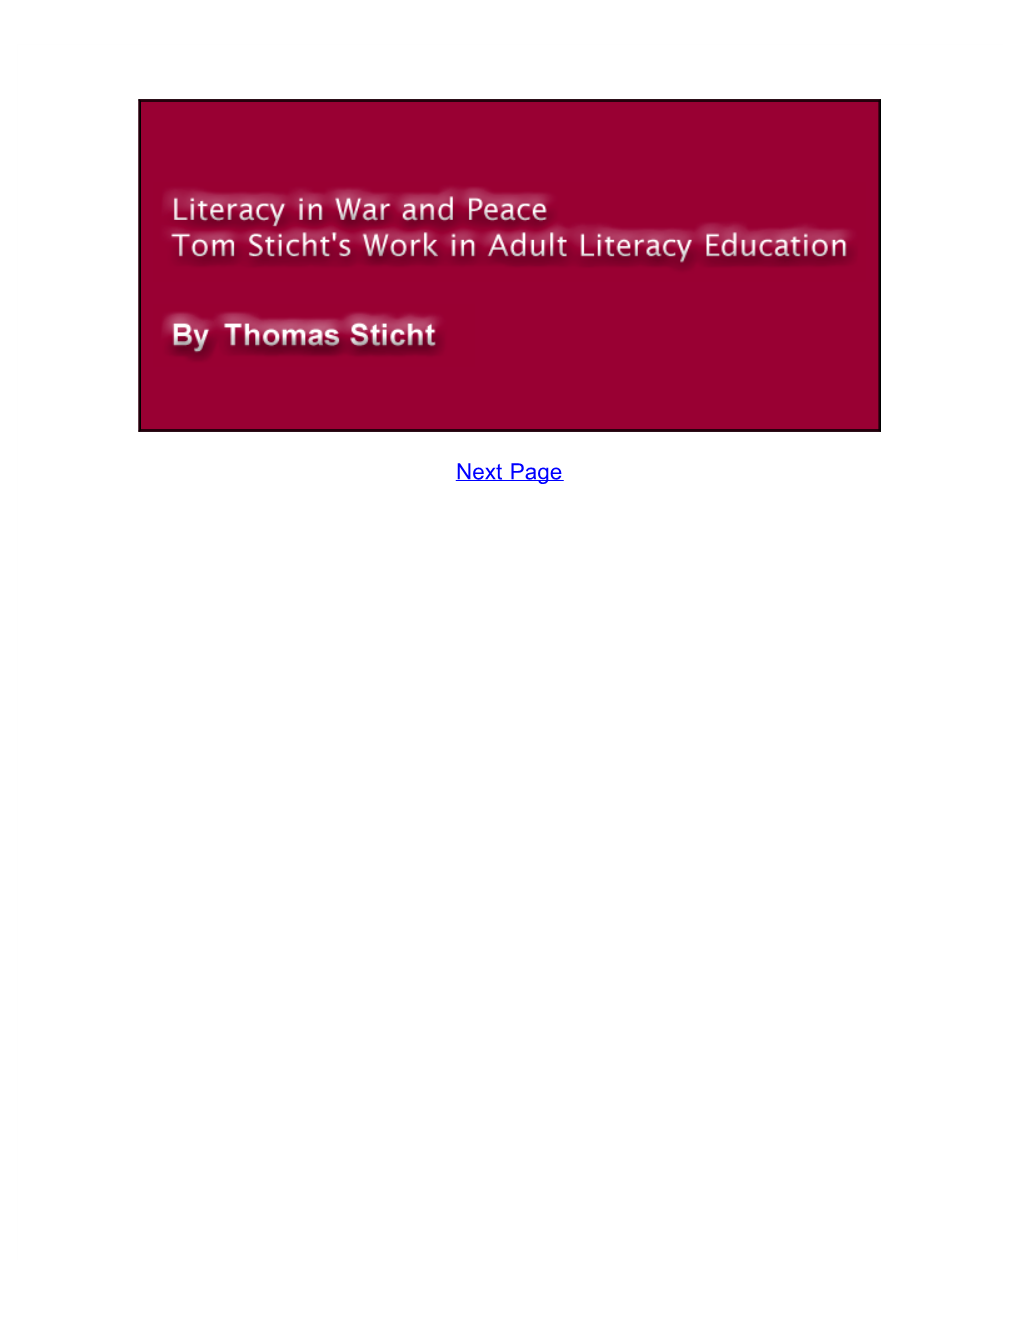 Tom Sticht's Work in Adult Literacy Education